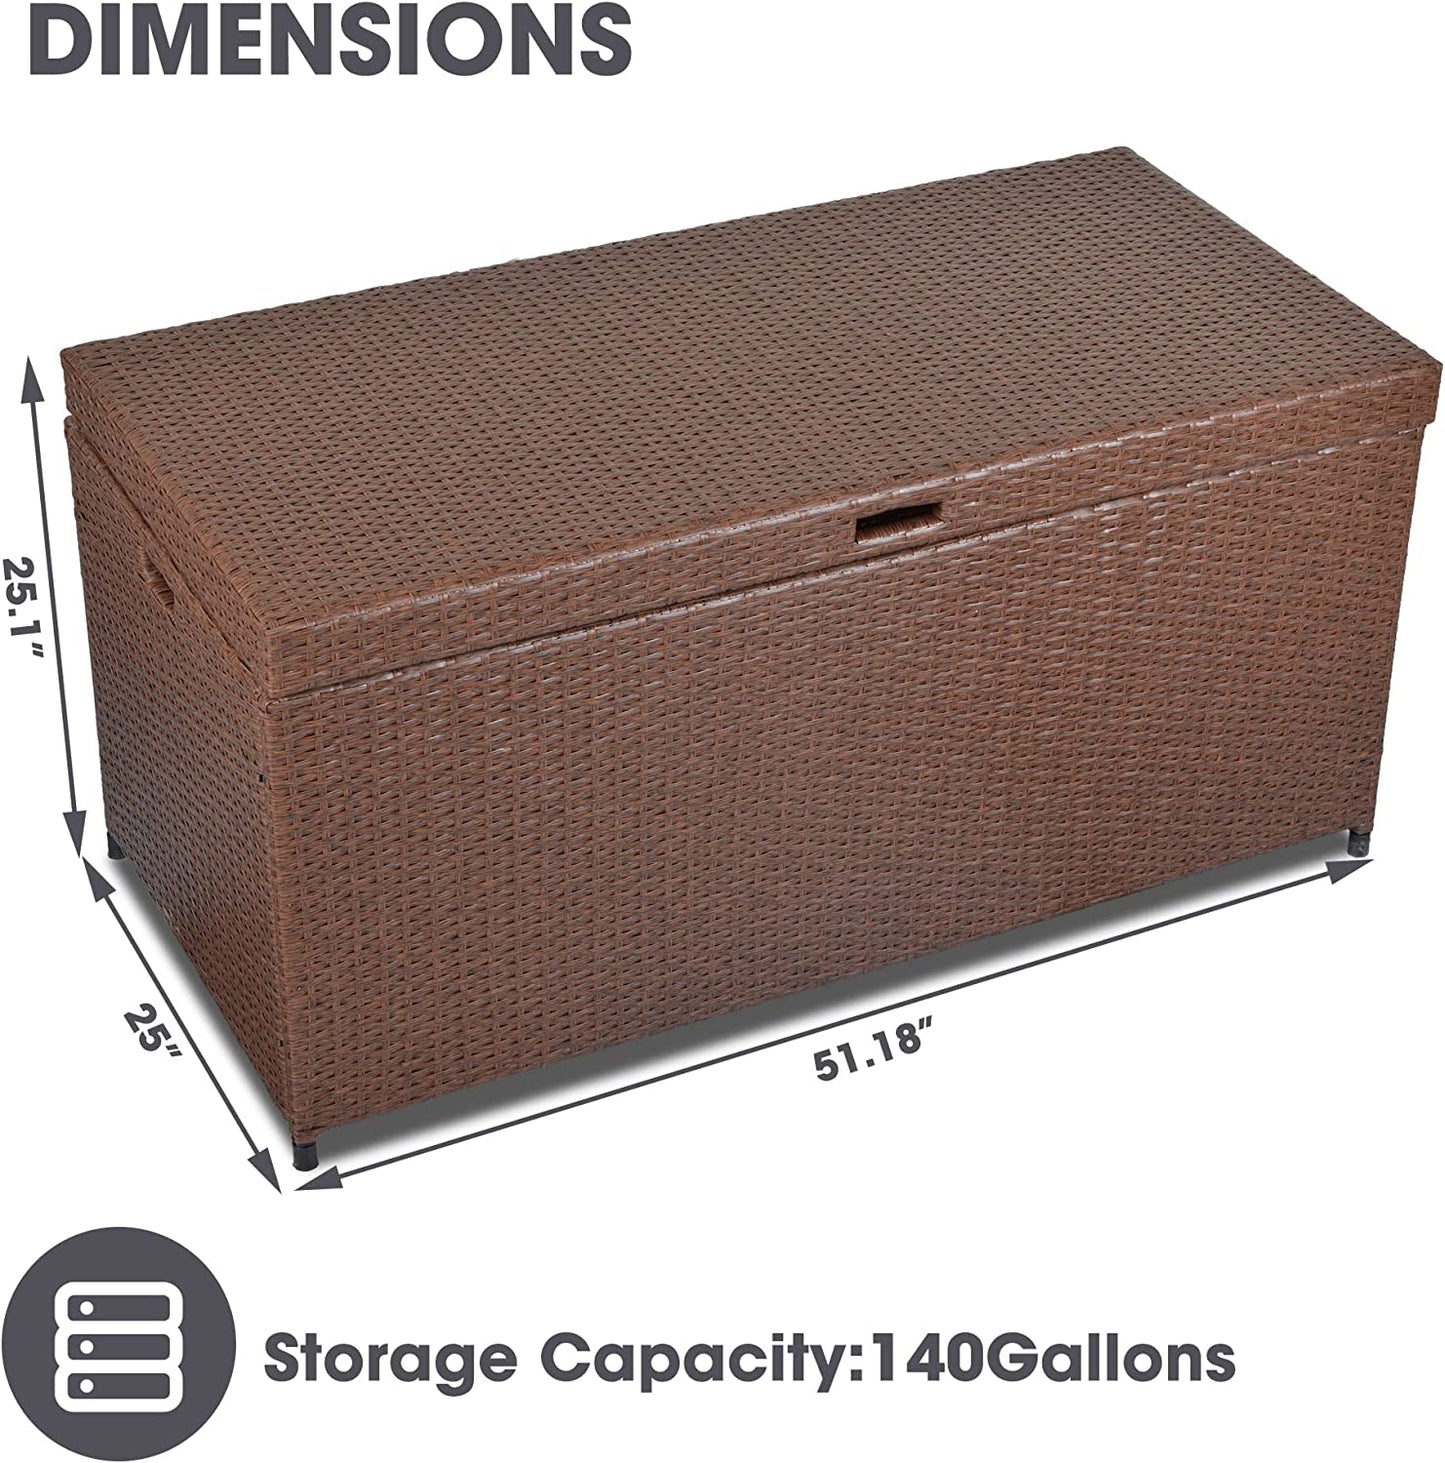 Wicker Storage Box with Waterproof Inner Patio Storage Bin, Deck Boxes for Cushions, Garden Tools, Pool Toys, Aluminum Frame, Brown